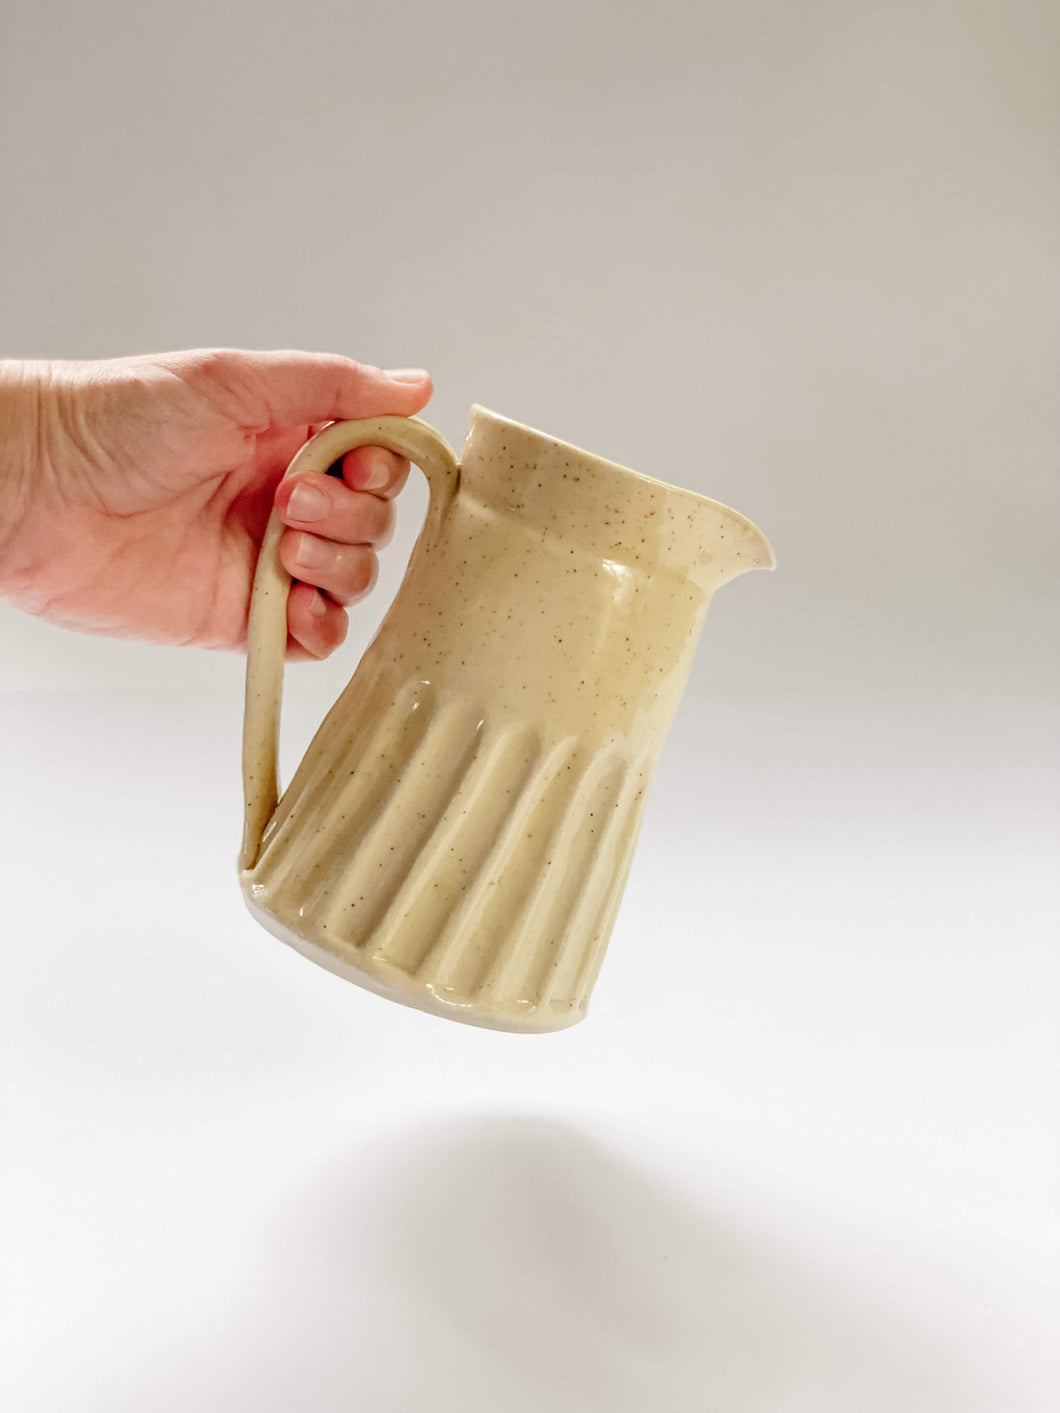 Wheel thrown, hand carved yellow speckled pitcher being held in a hand